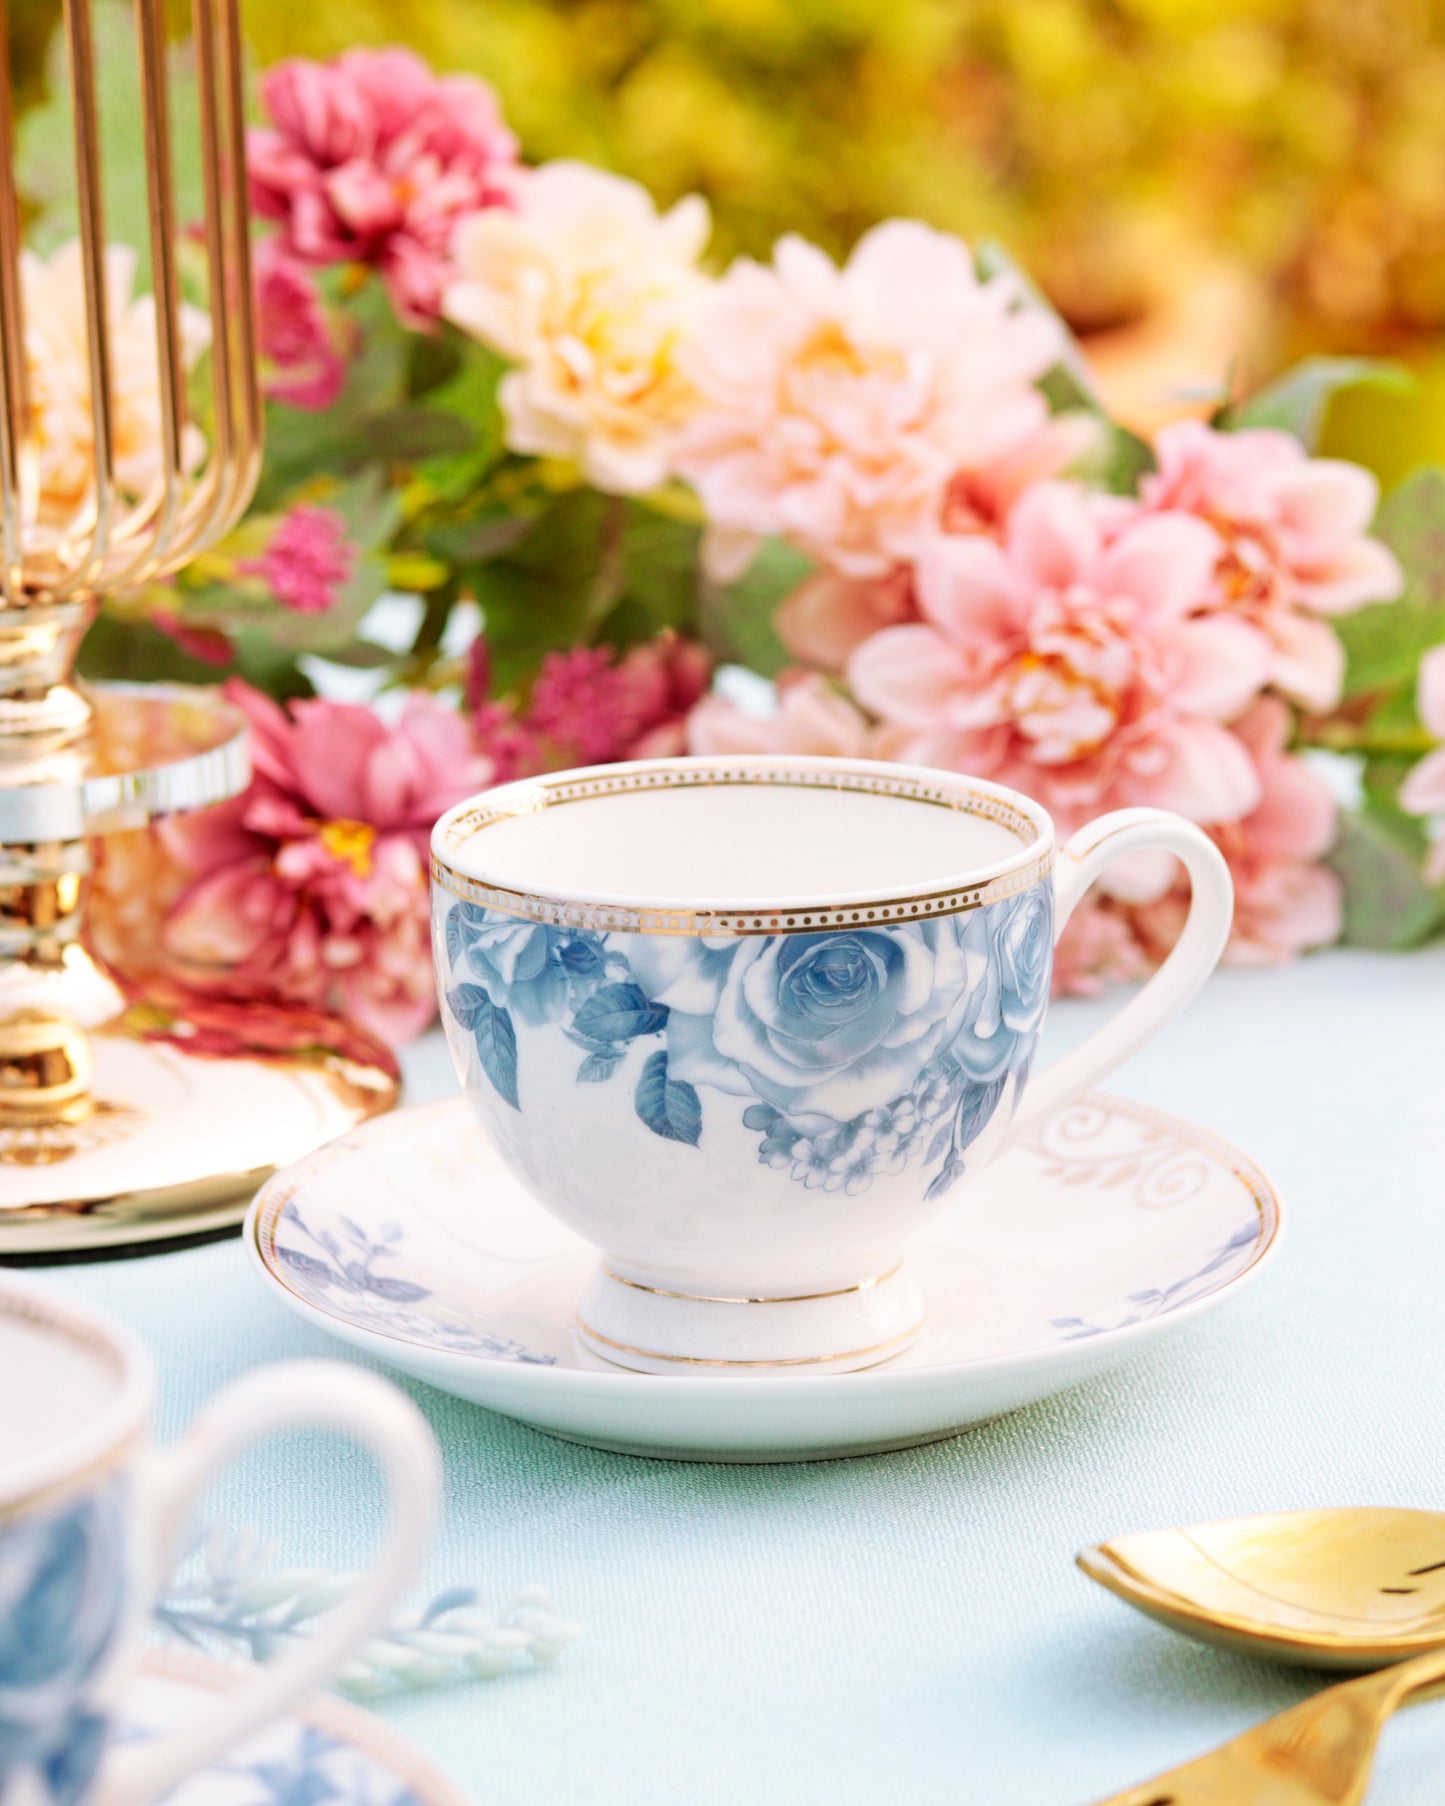 Azure Gold Cup and Saucer Set (6 Cups and 6 Saucers) - Vigneto